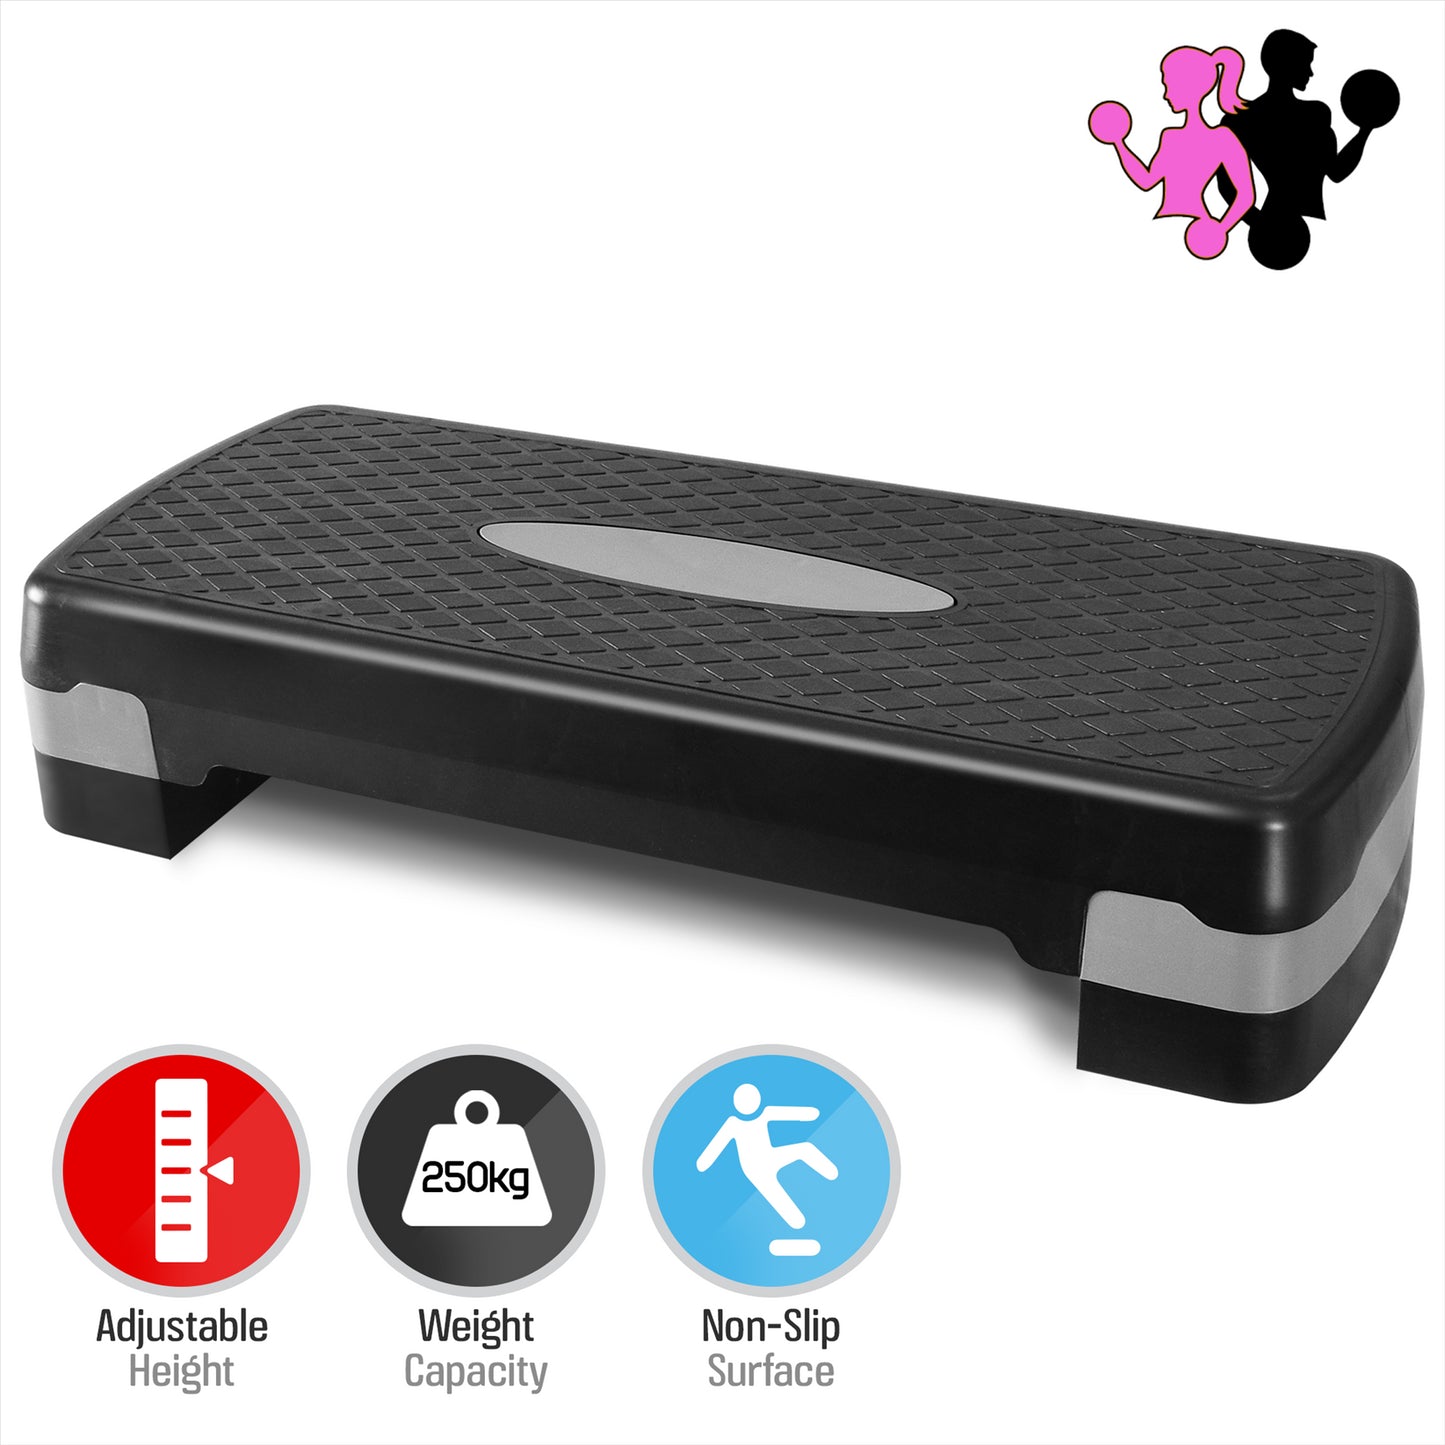 Adjustable Aerobic Stepper For Home Workouts